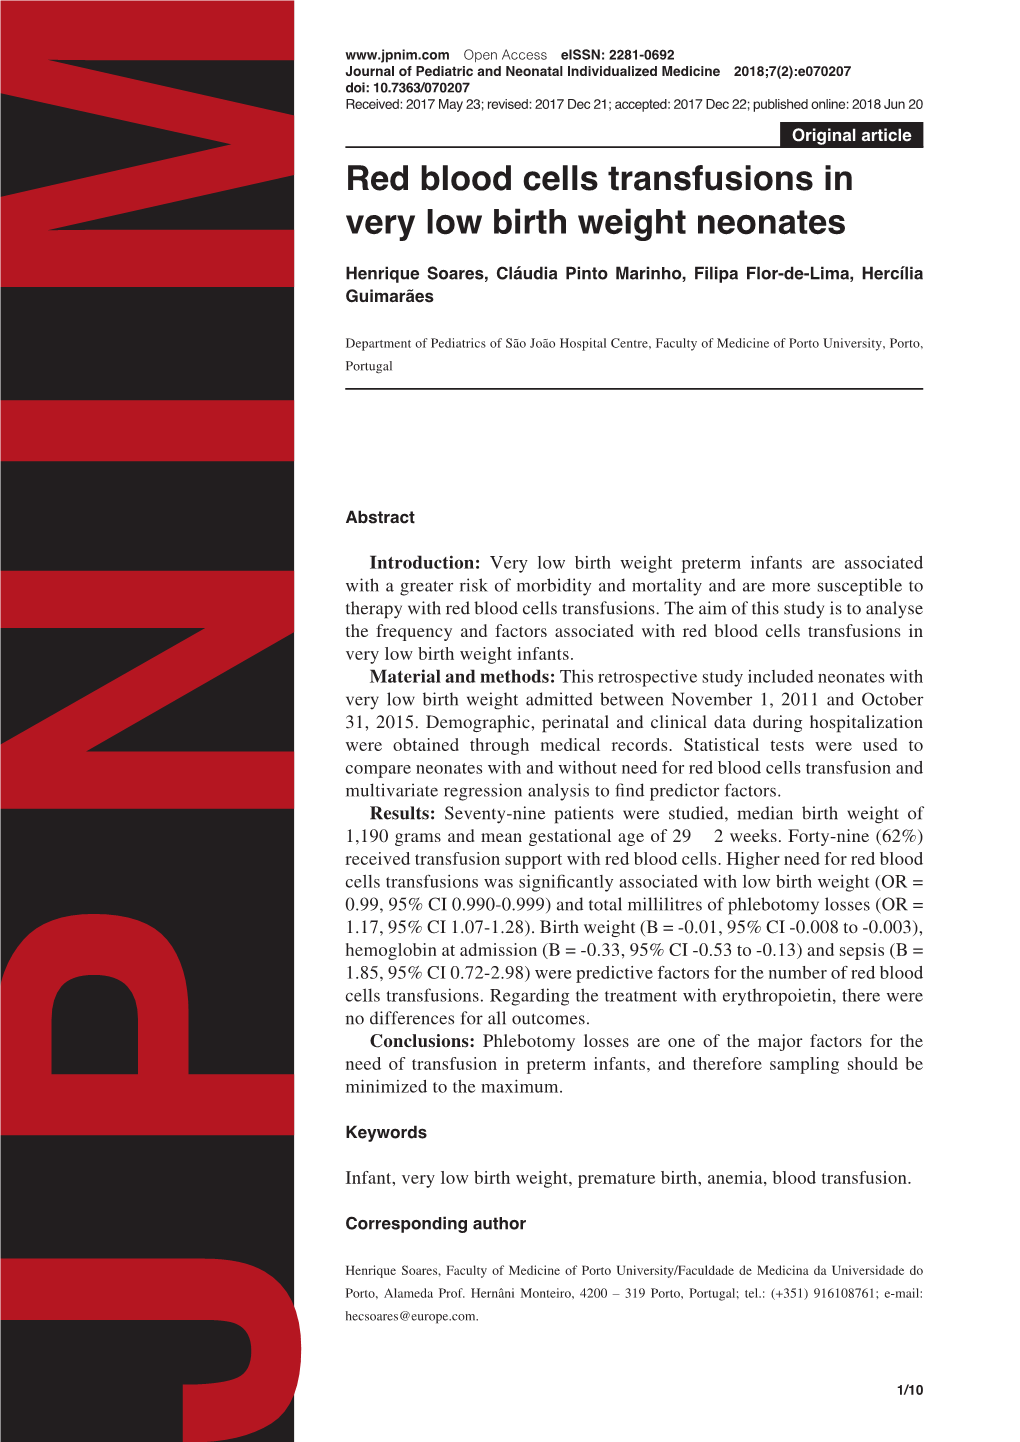 Red Blood Cells Transfusions in Very Low Birth Weight Neonates